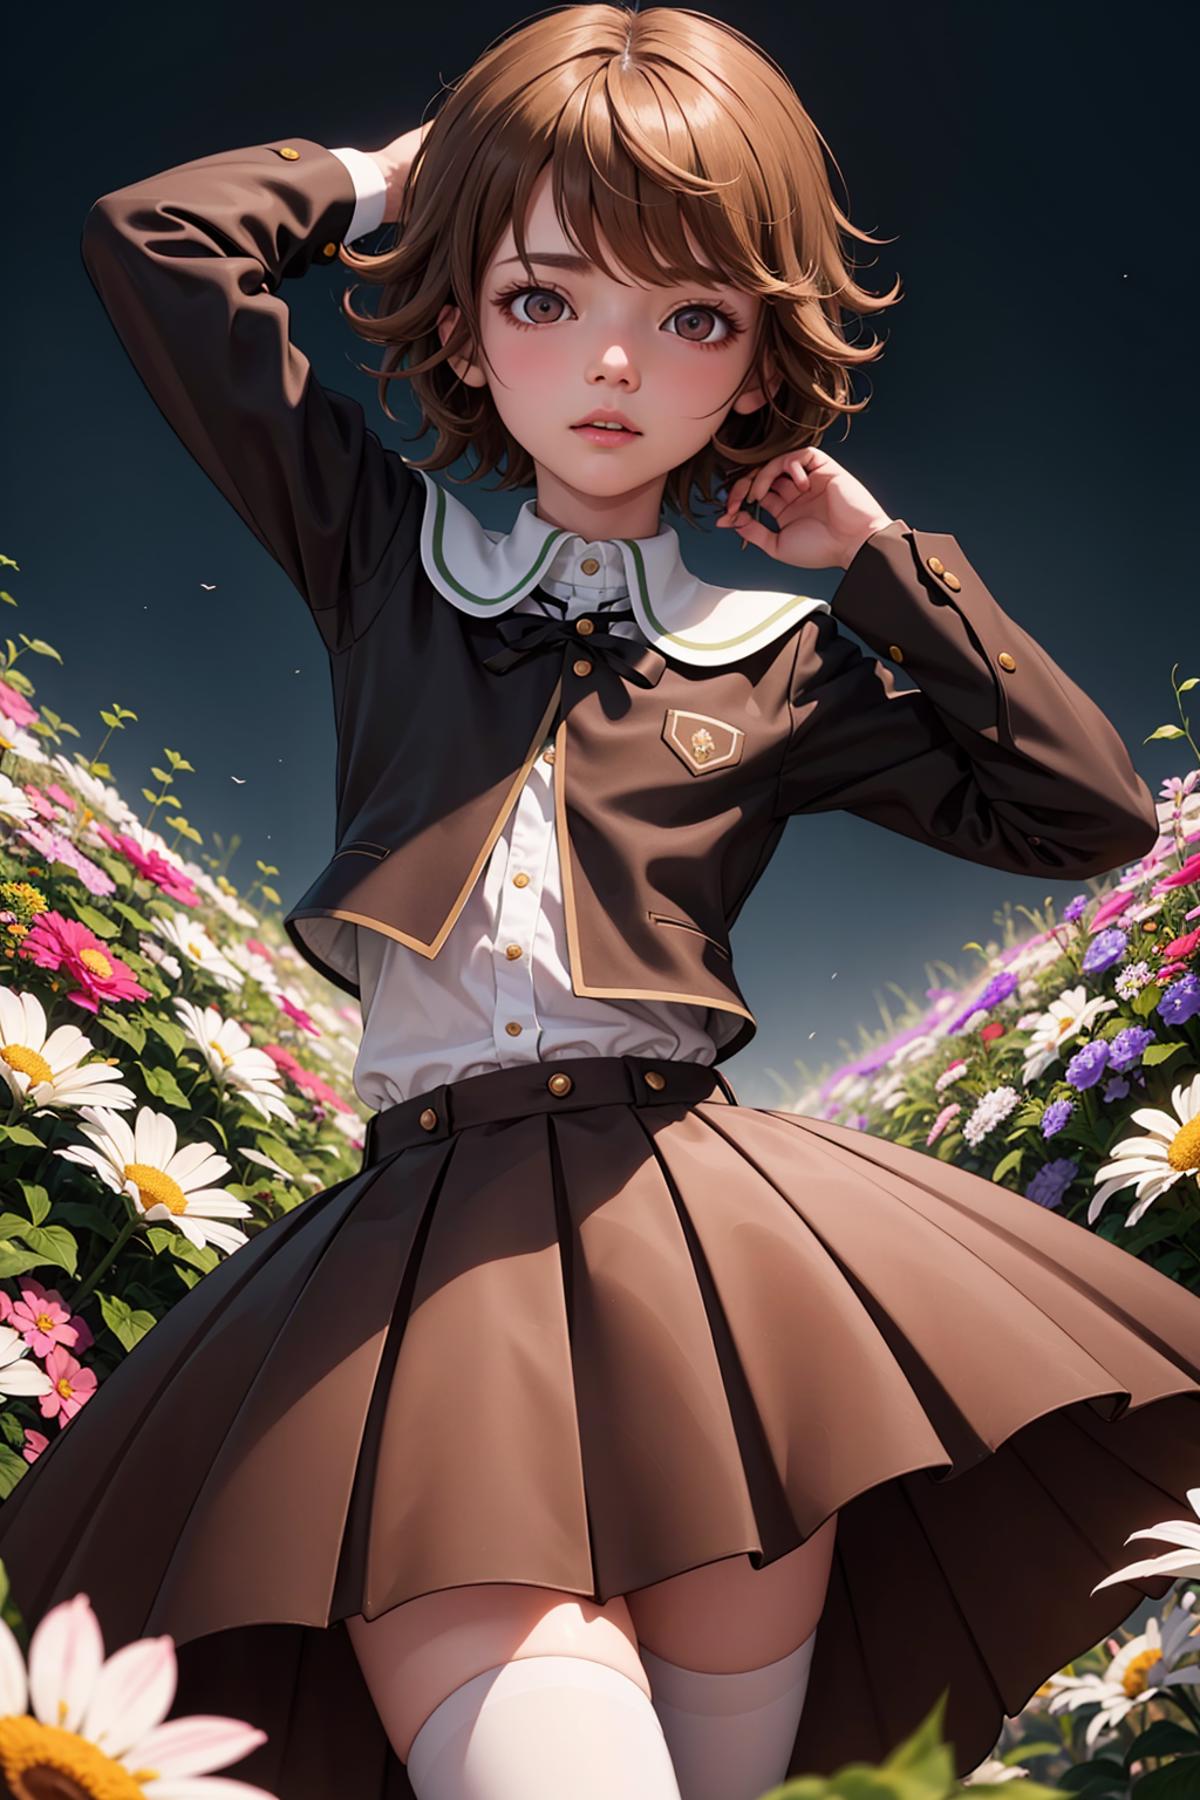 A young girl wearing a brown jacket and skirt, posing in a field of flowers.